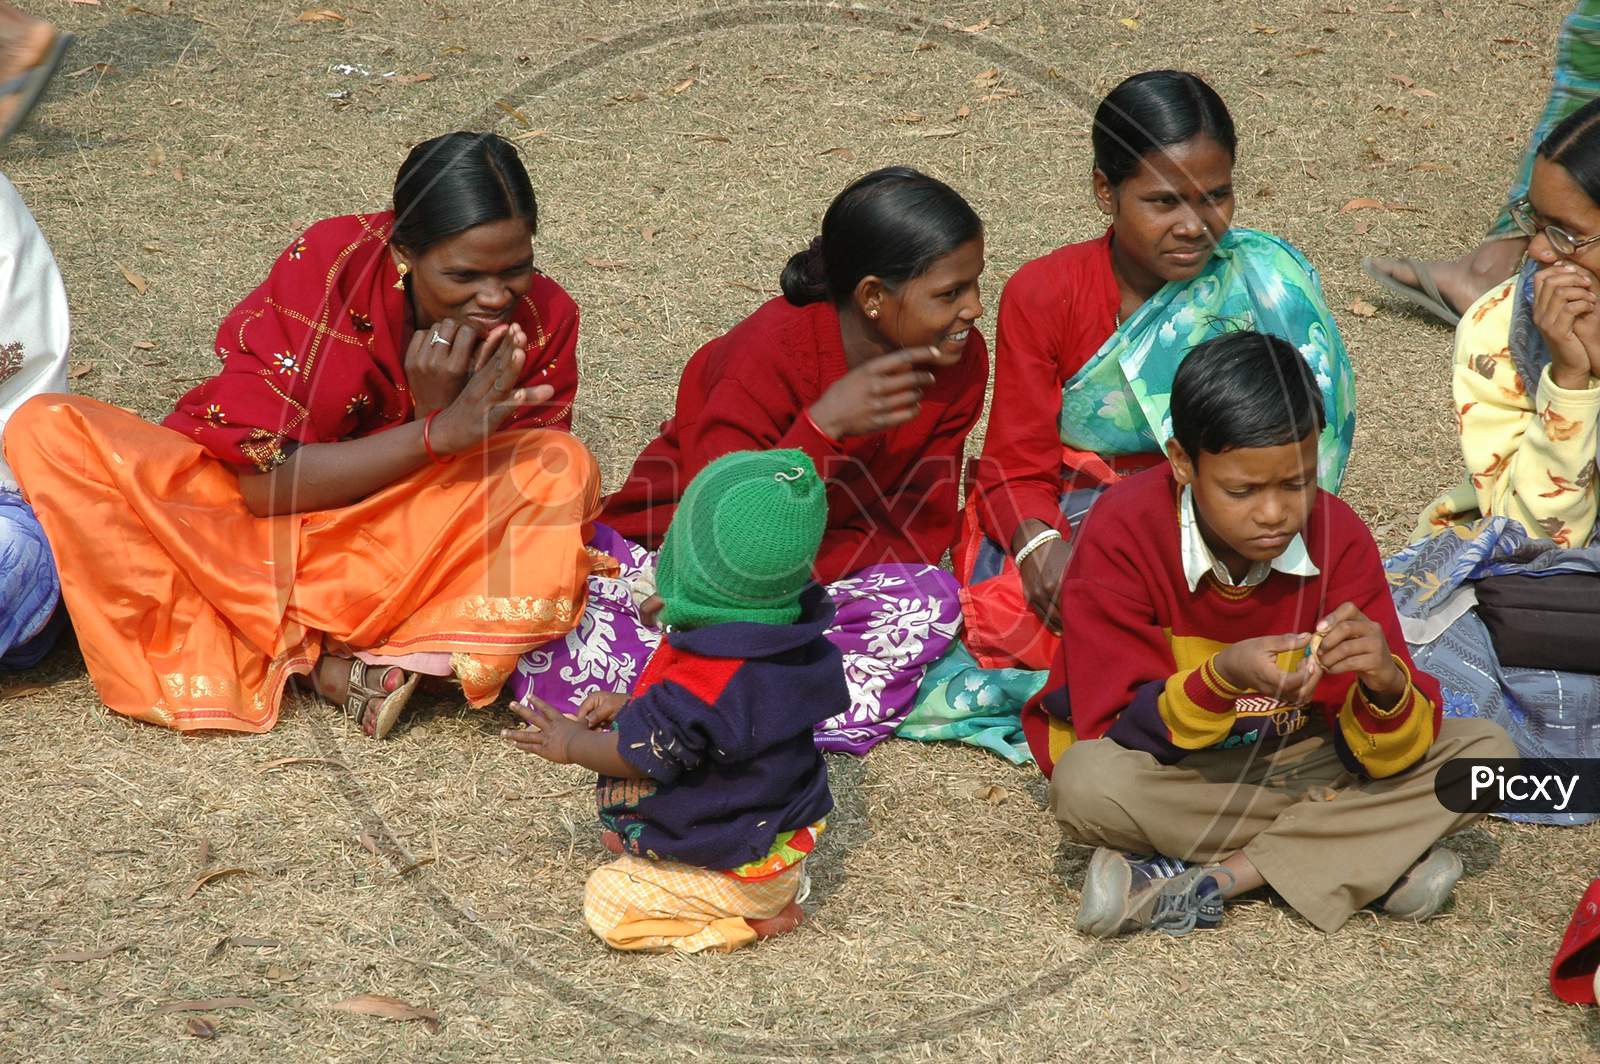 Indian Tribal women sitting on the ground